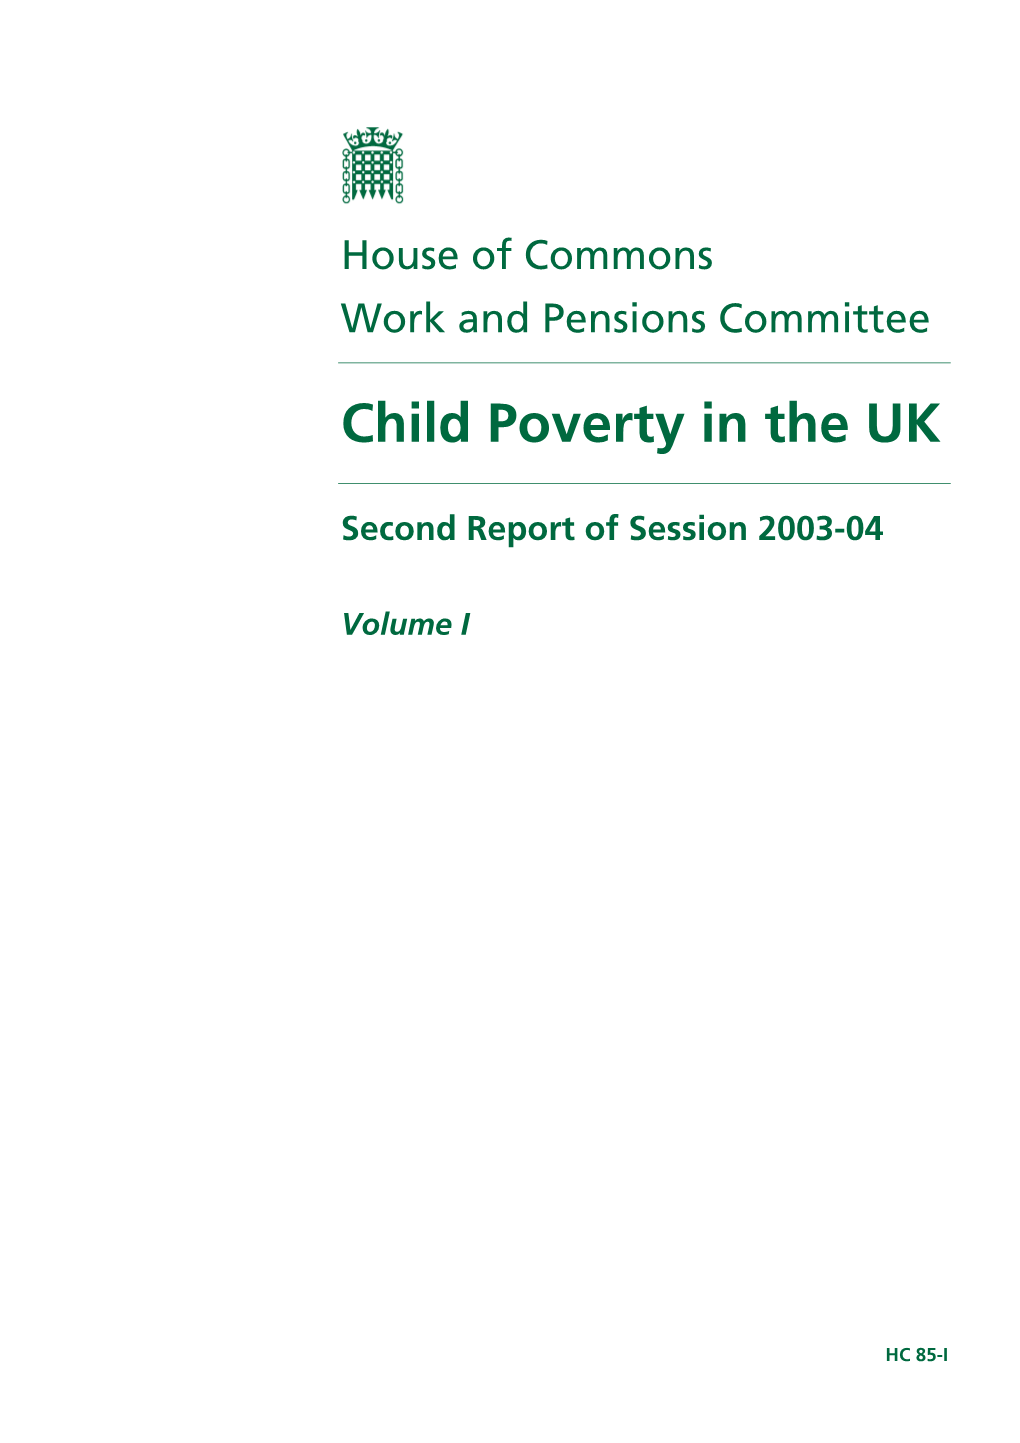 Child Poverty in the UK